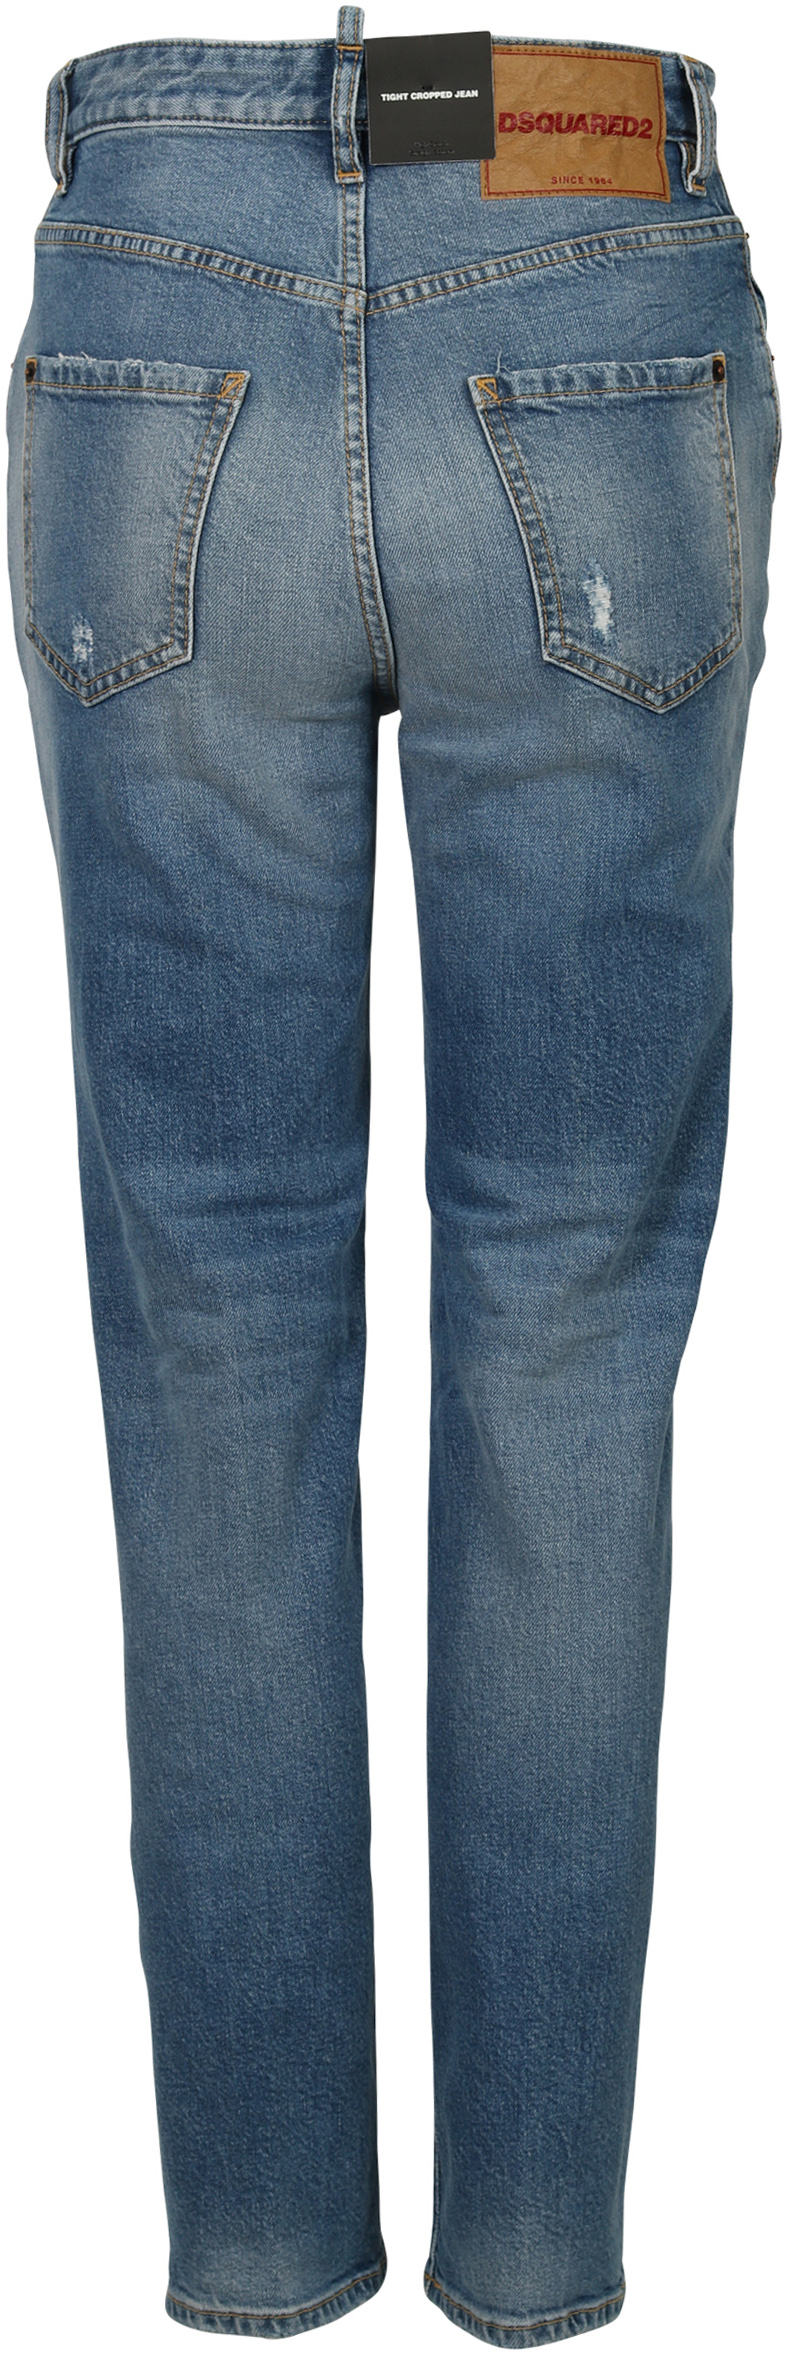 Dsquared Jeans Tight Cropped Light Blue Washed